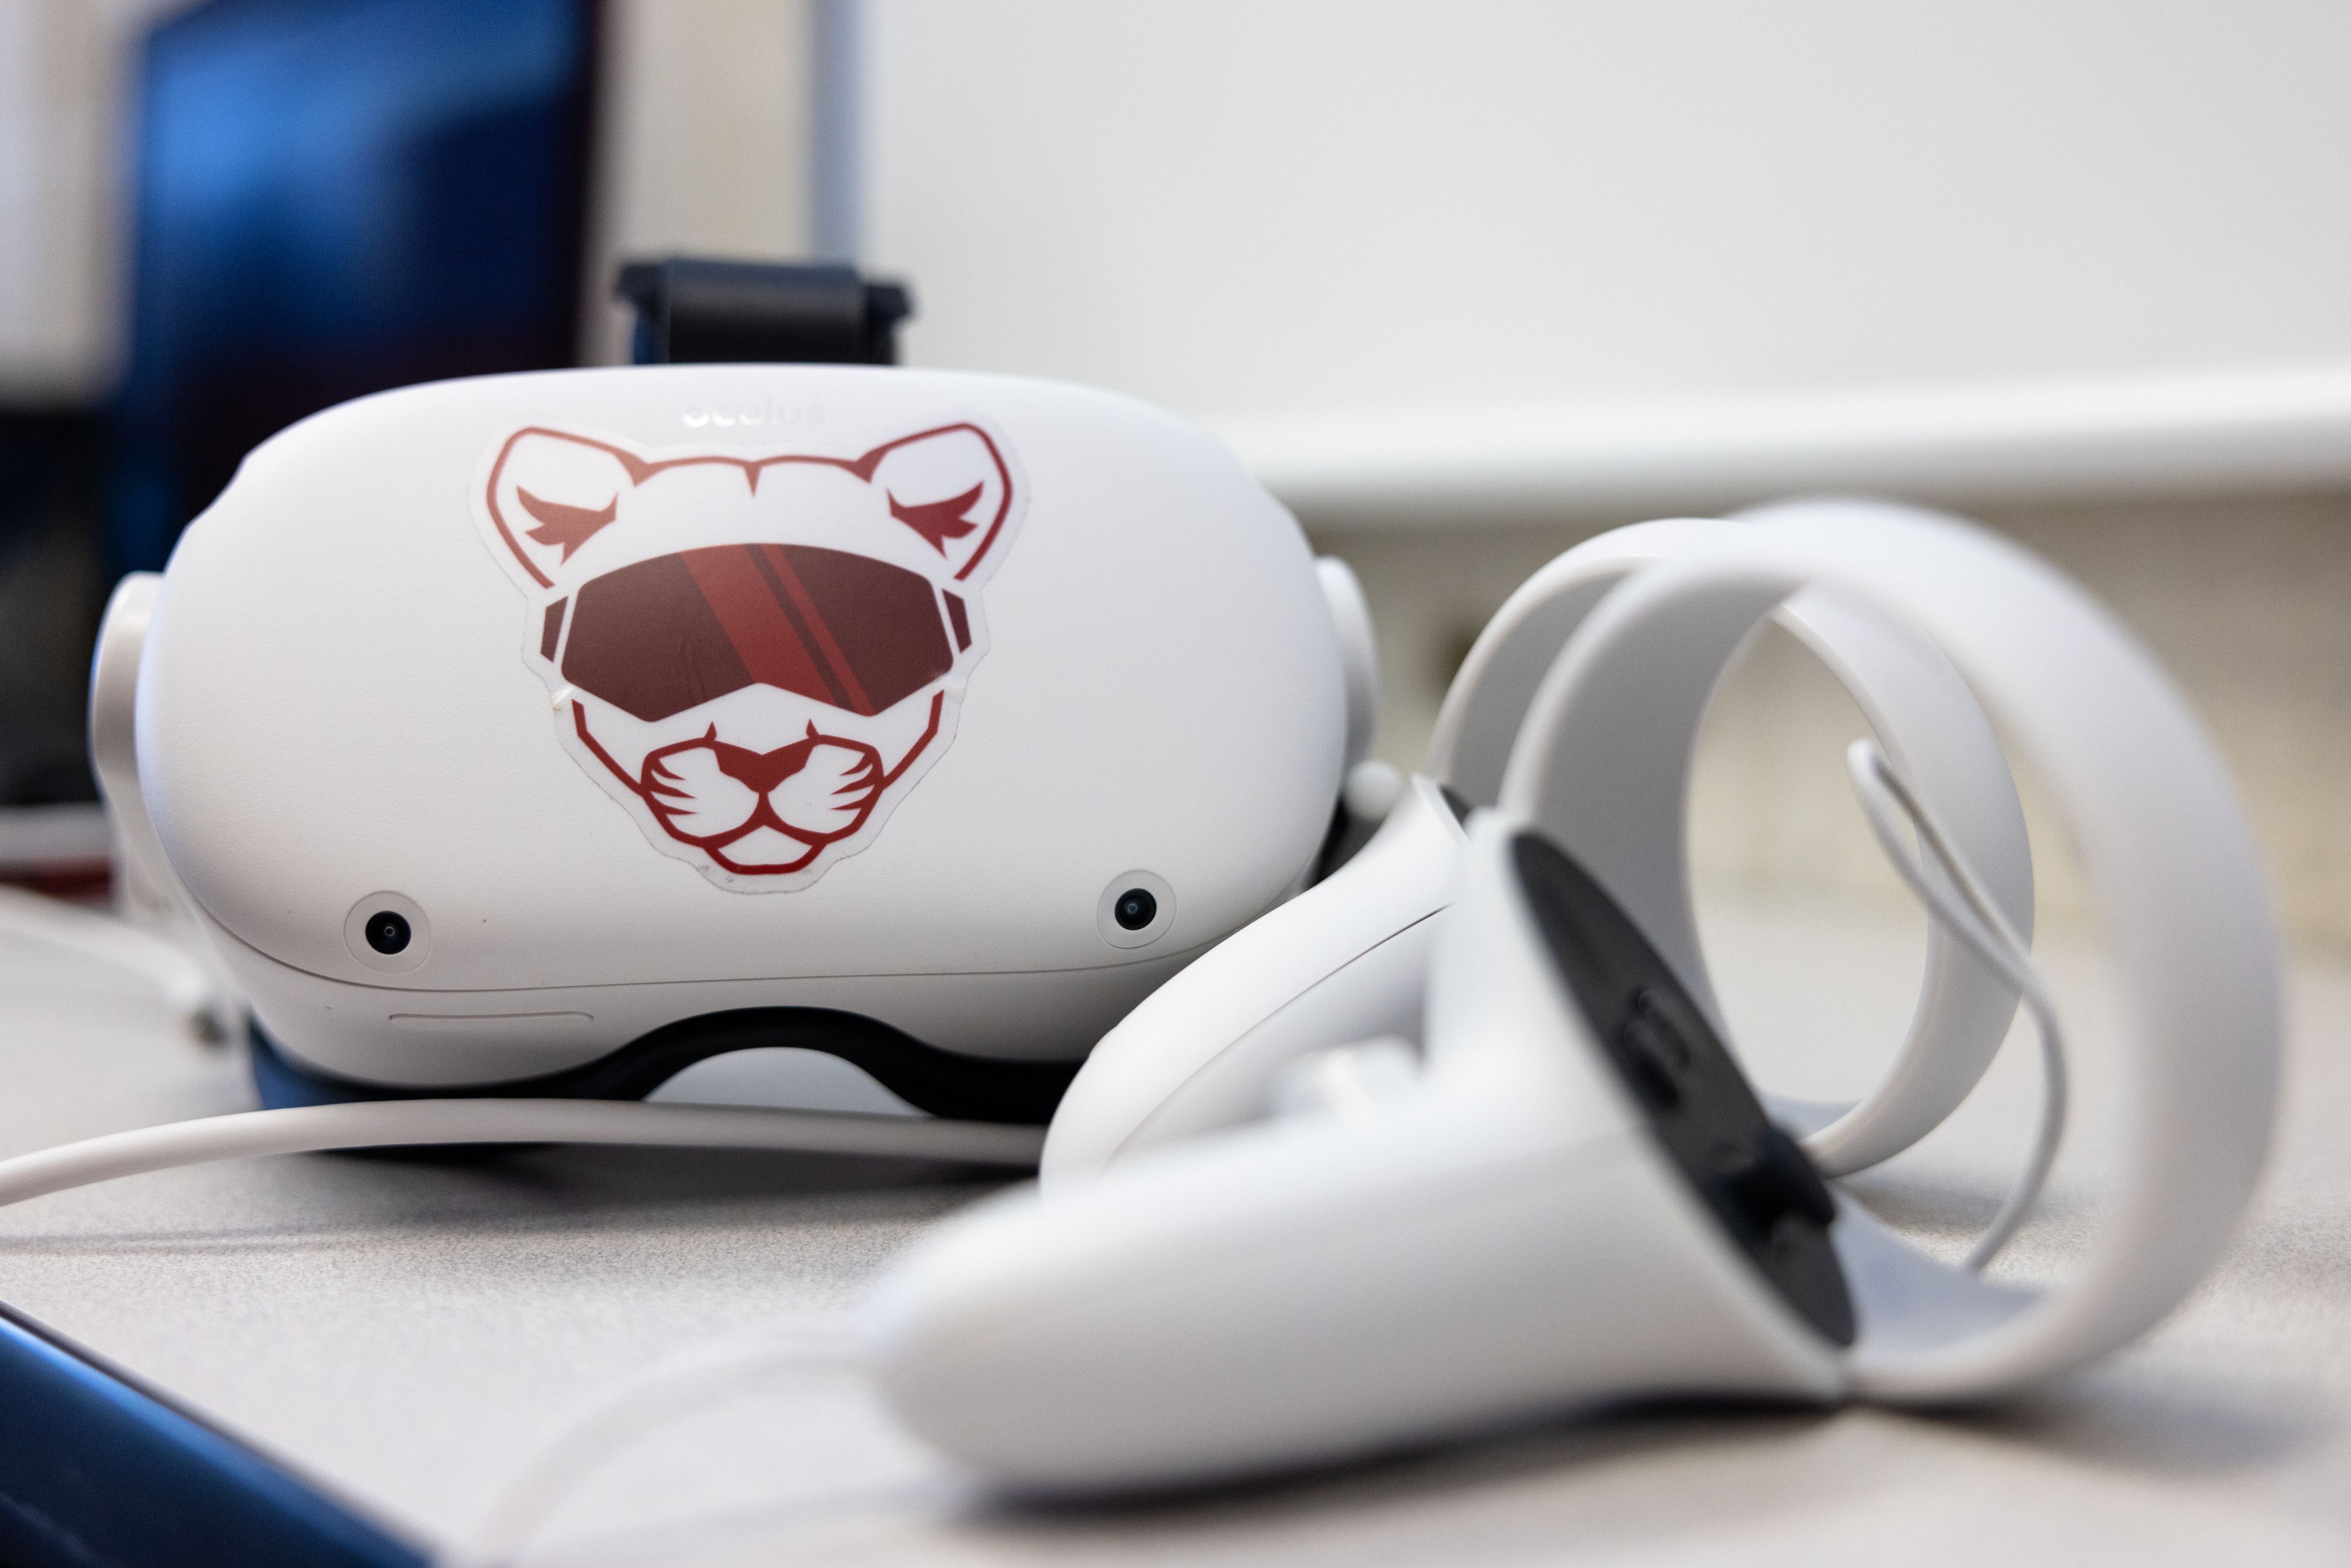 White goggles with illustration of cougar and headphones.